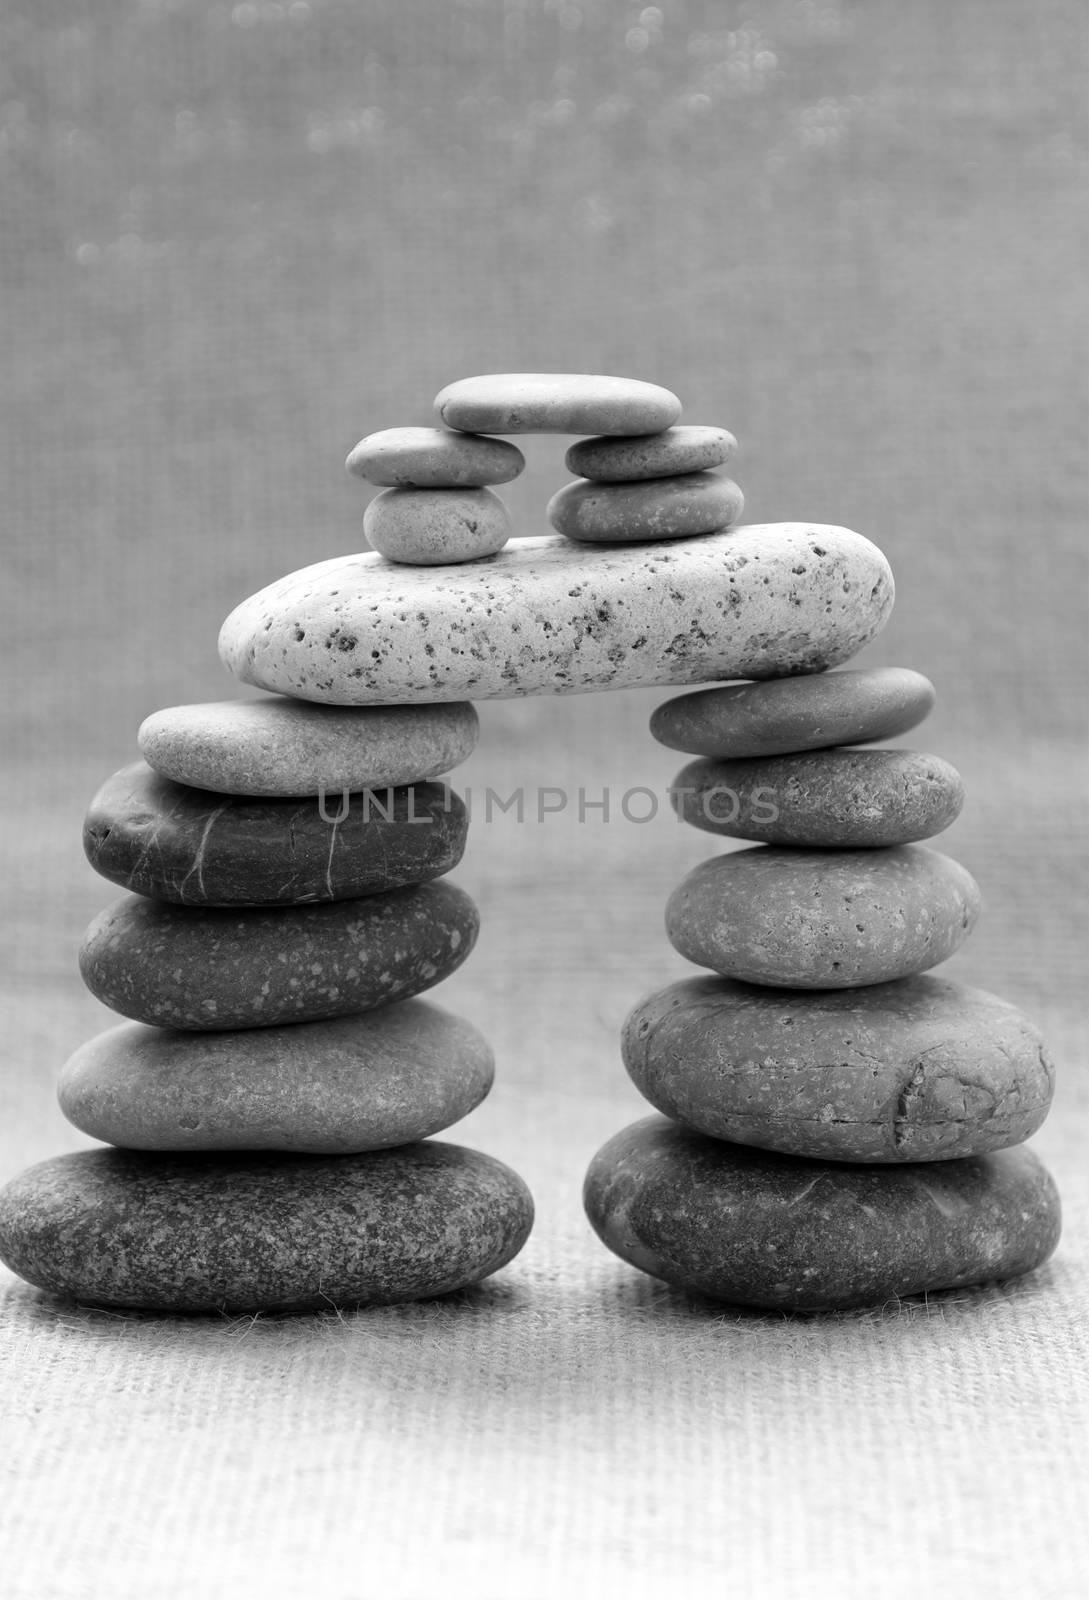 Amazing arrangement to make tower from pebble, two stack of stones and more boulder to illustration for bond in family relationship or burden of debt